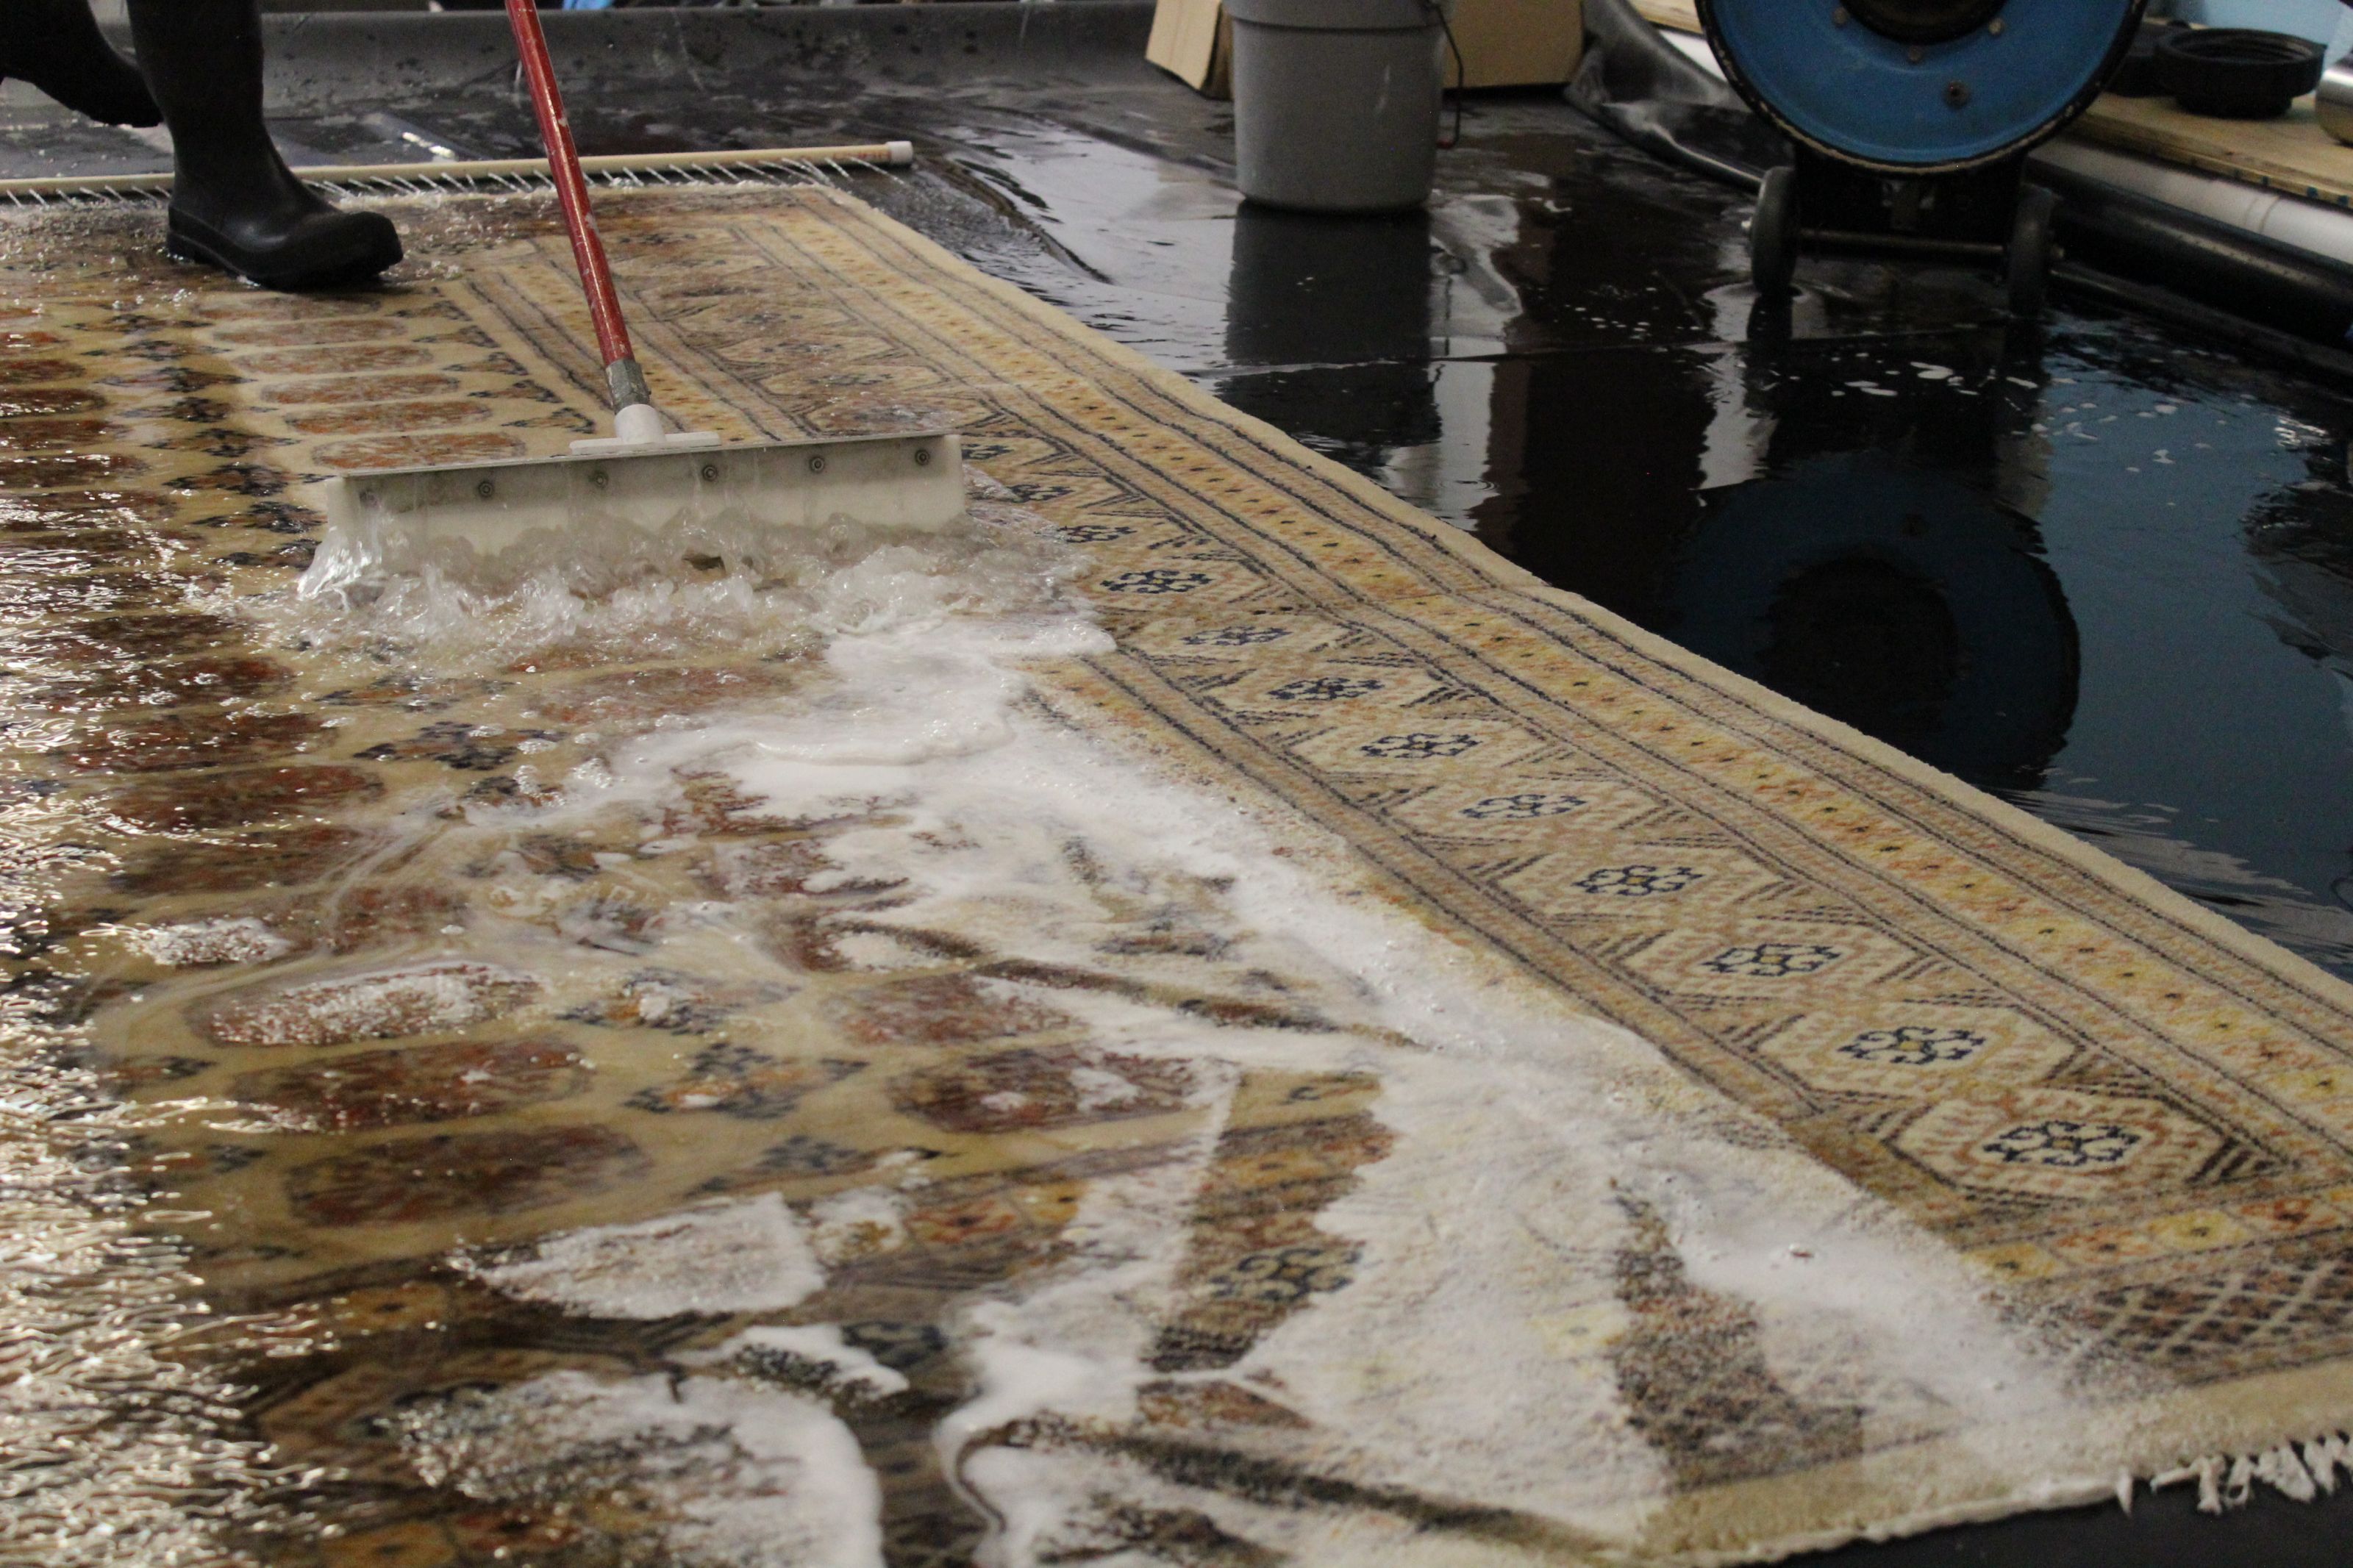 Prescott Valley Rug Cleaning Experts